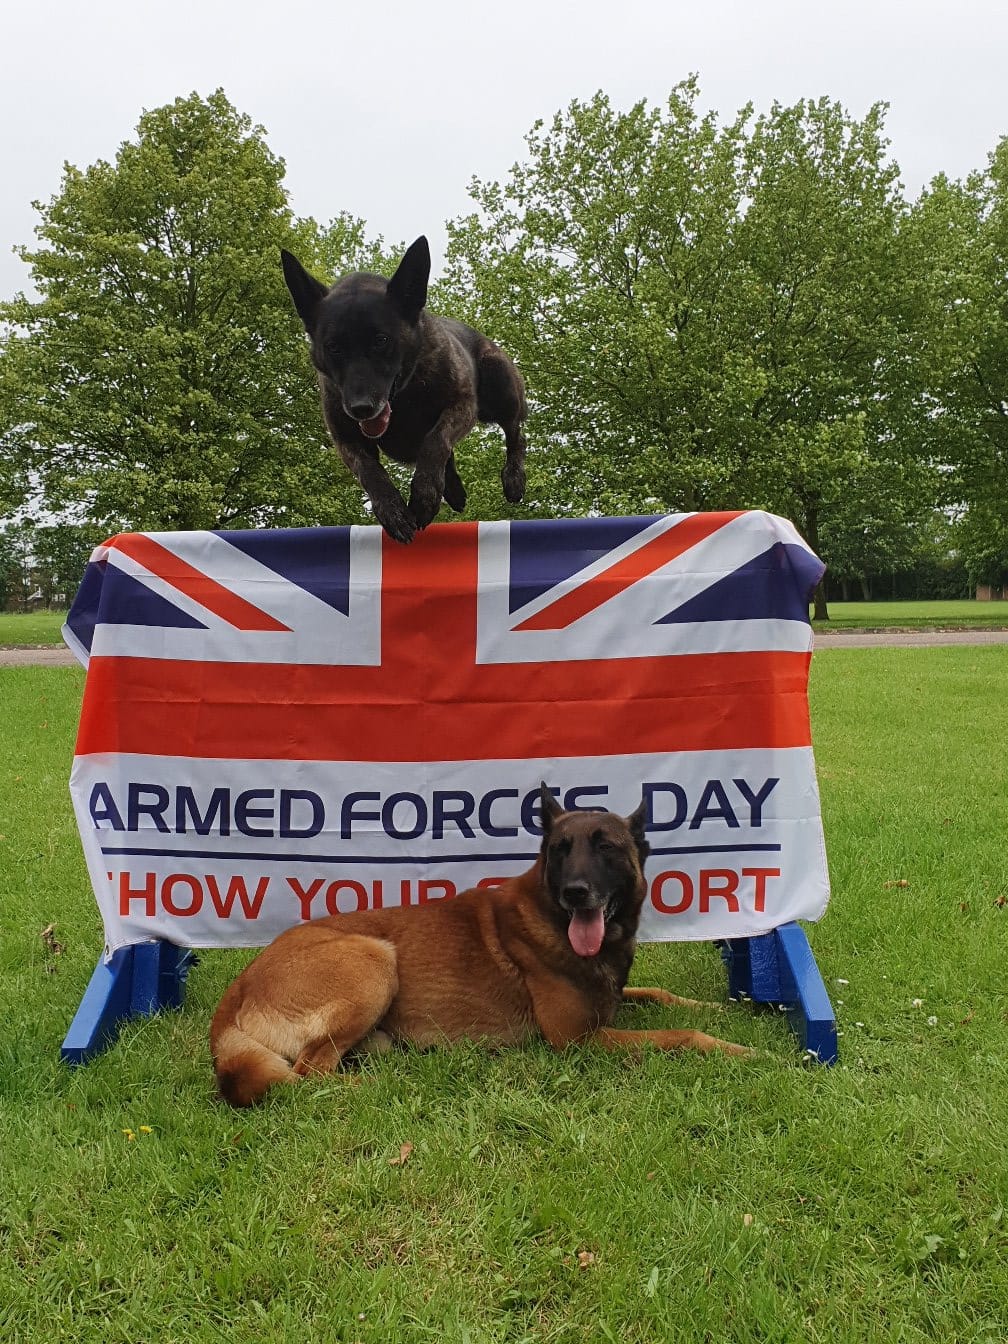 Image shows military working dogs with an Armed Forces Day flag.